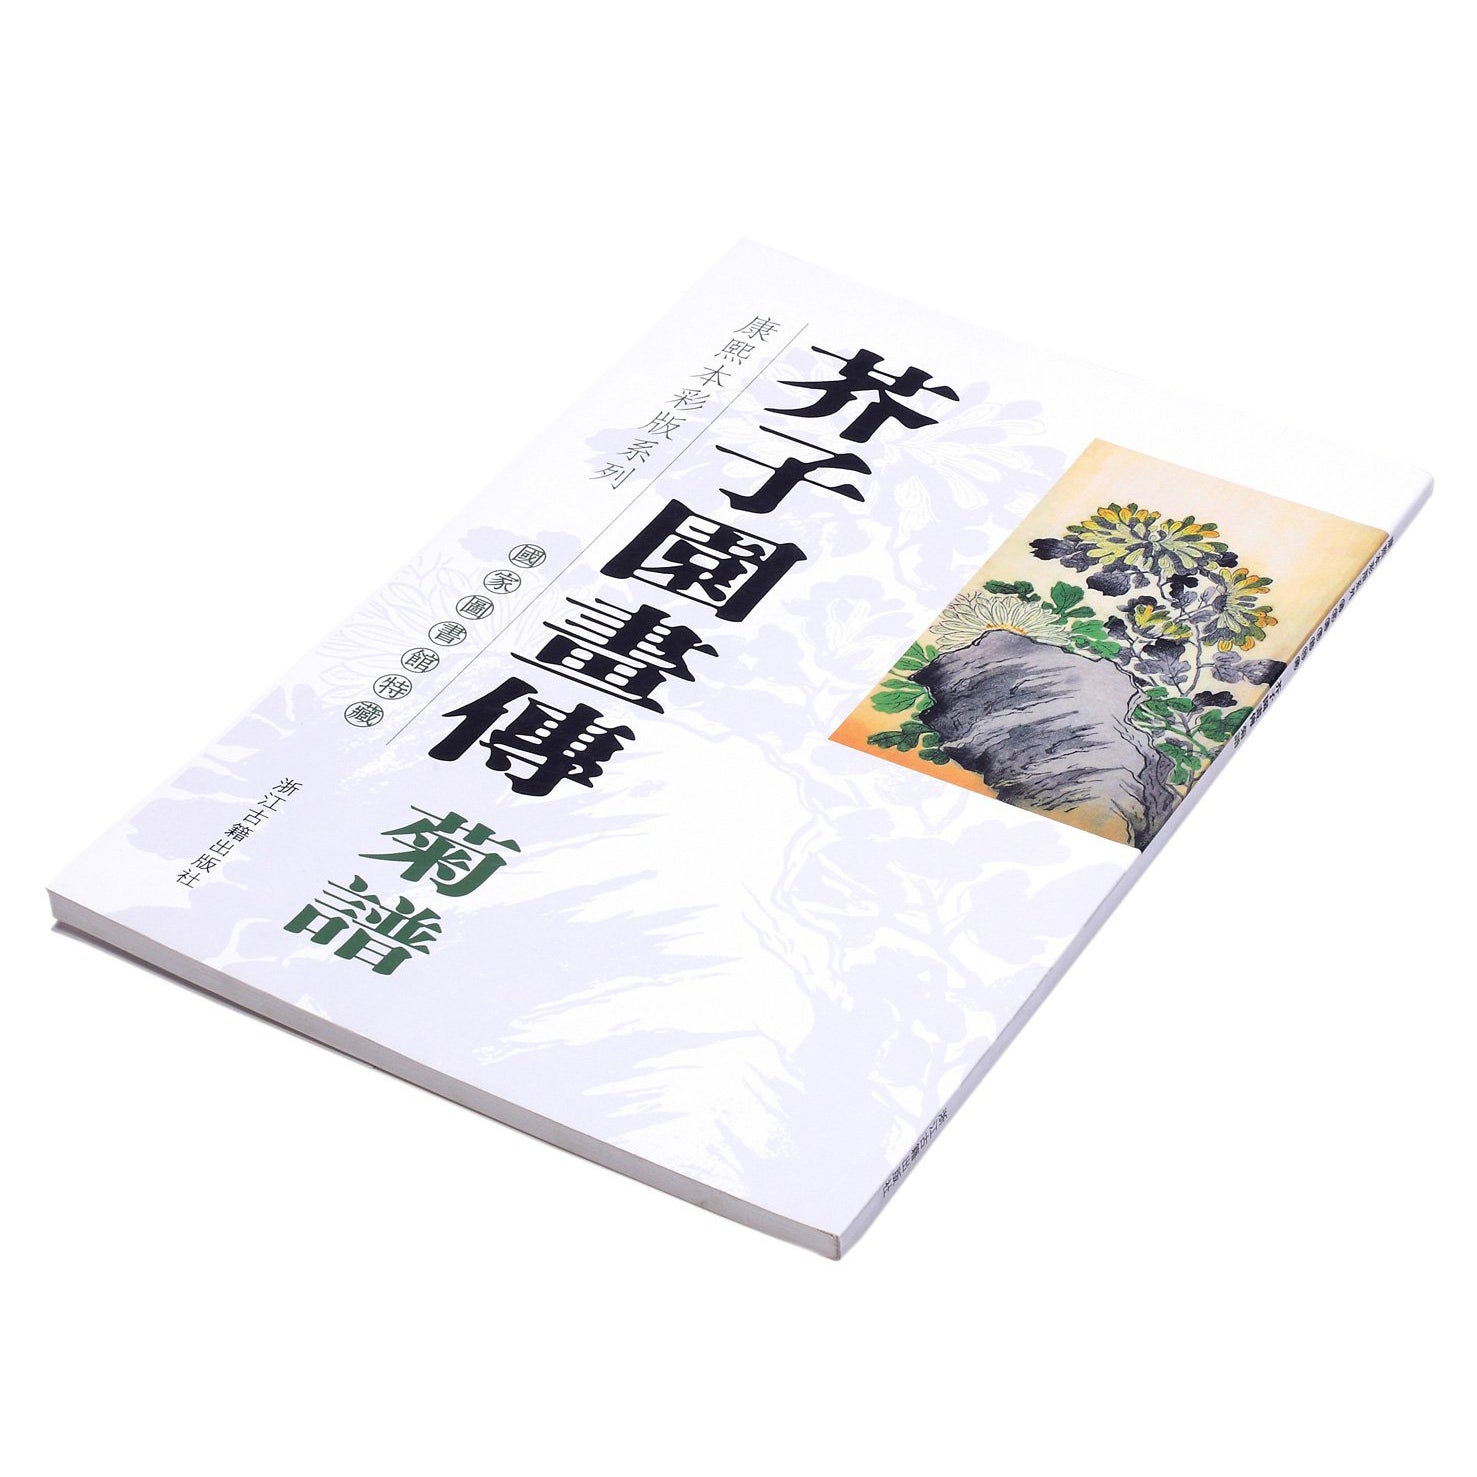 themed instructional Chinese brush painting book based on the traditional Mustard Seed Garden Chinese brush painting series